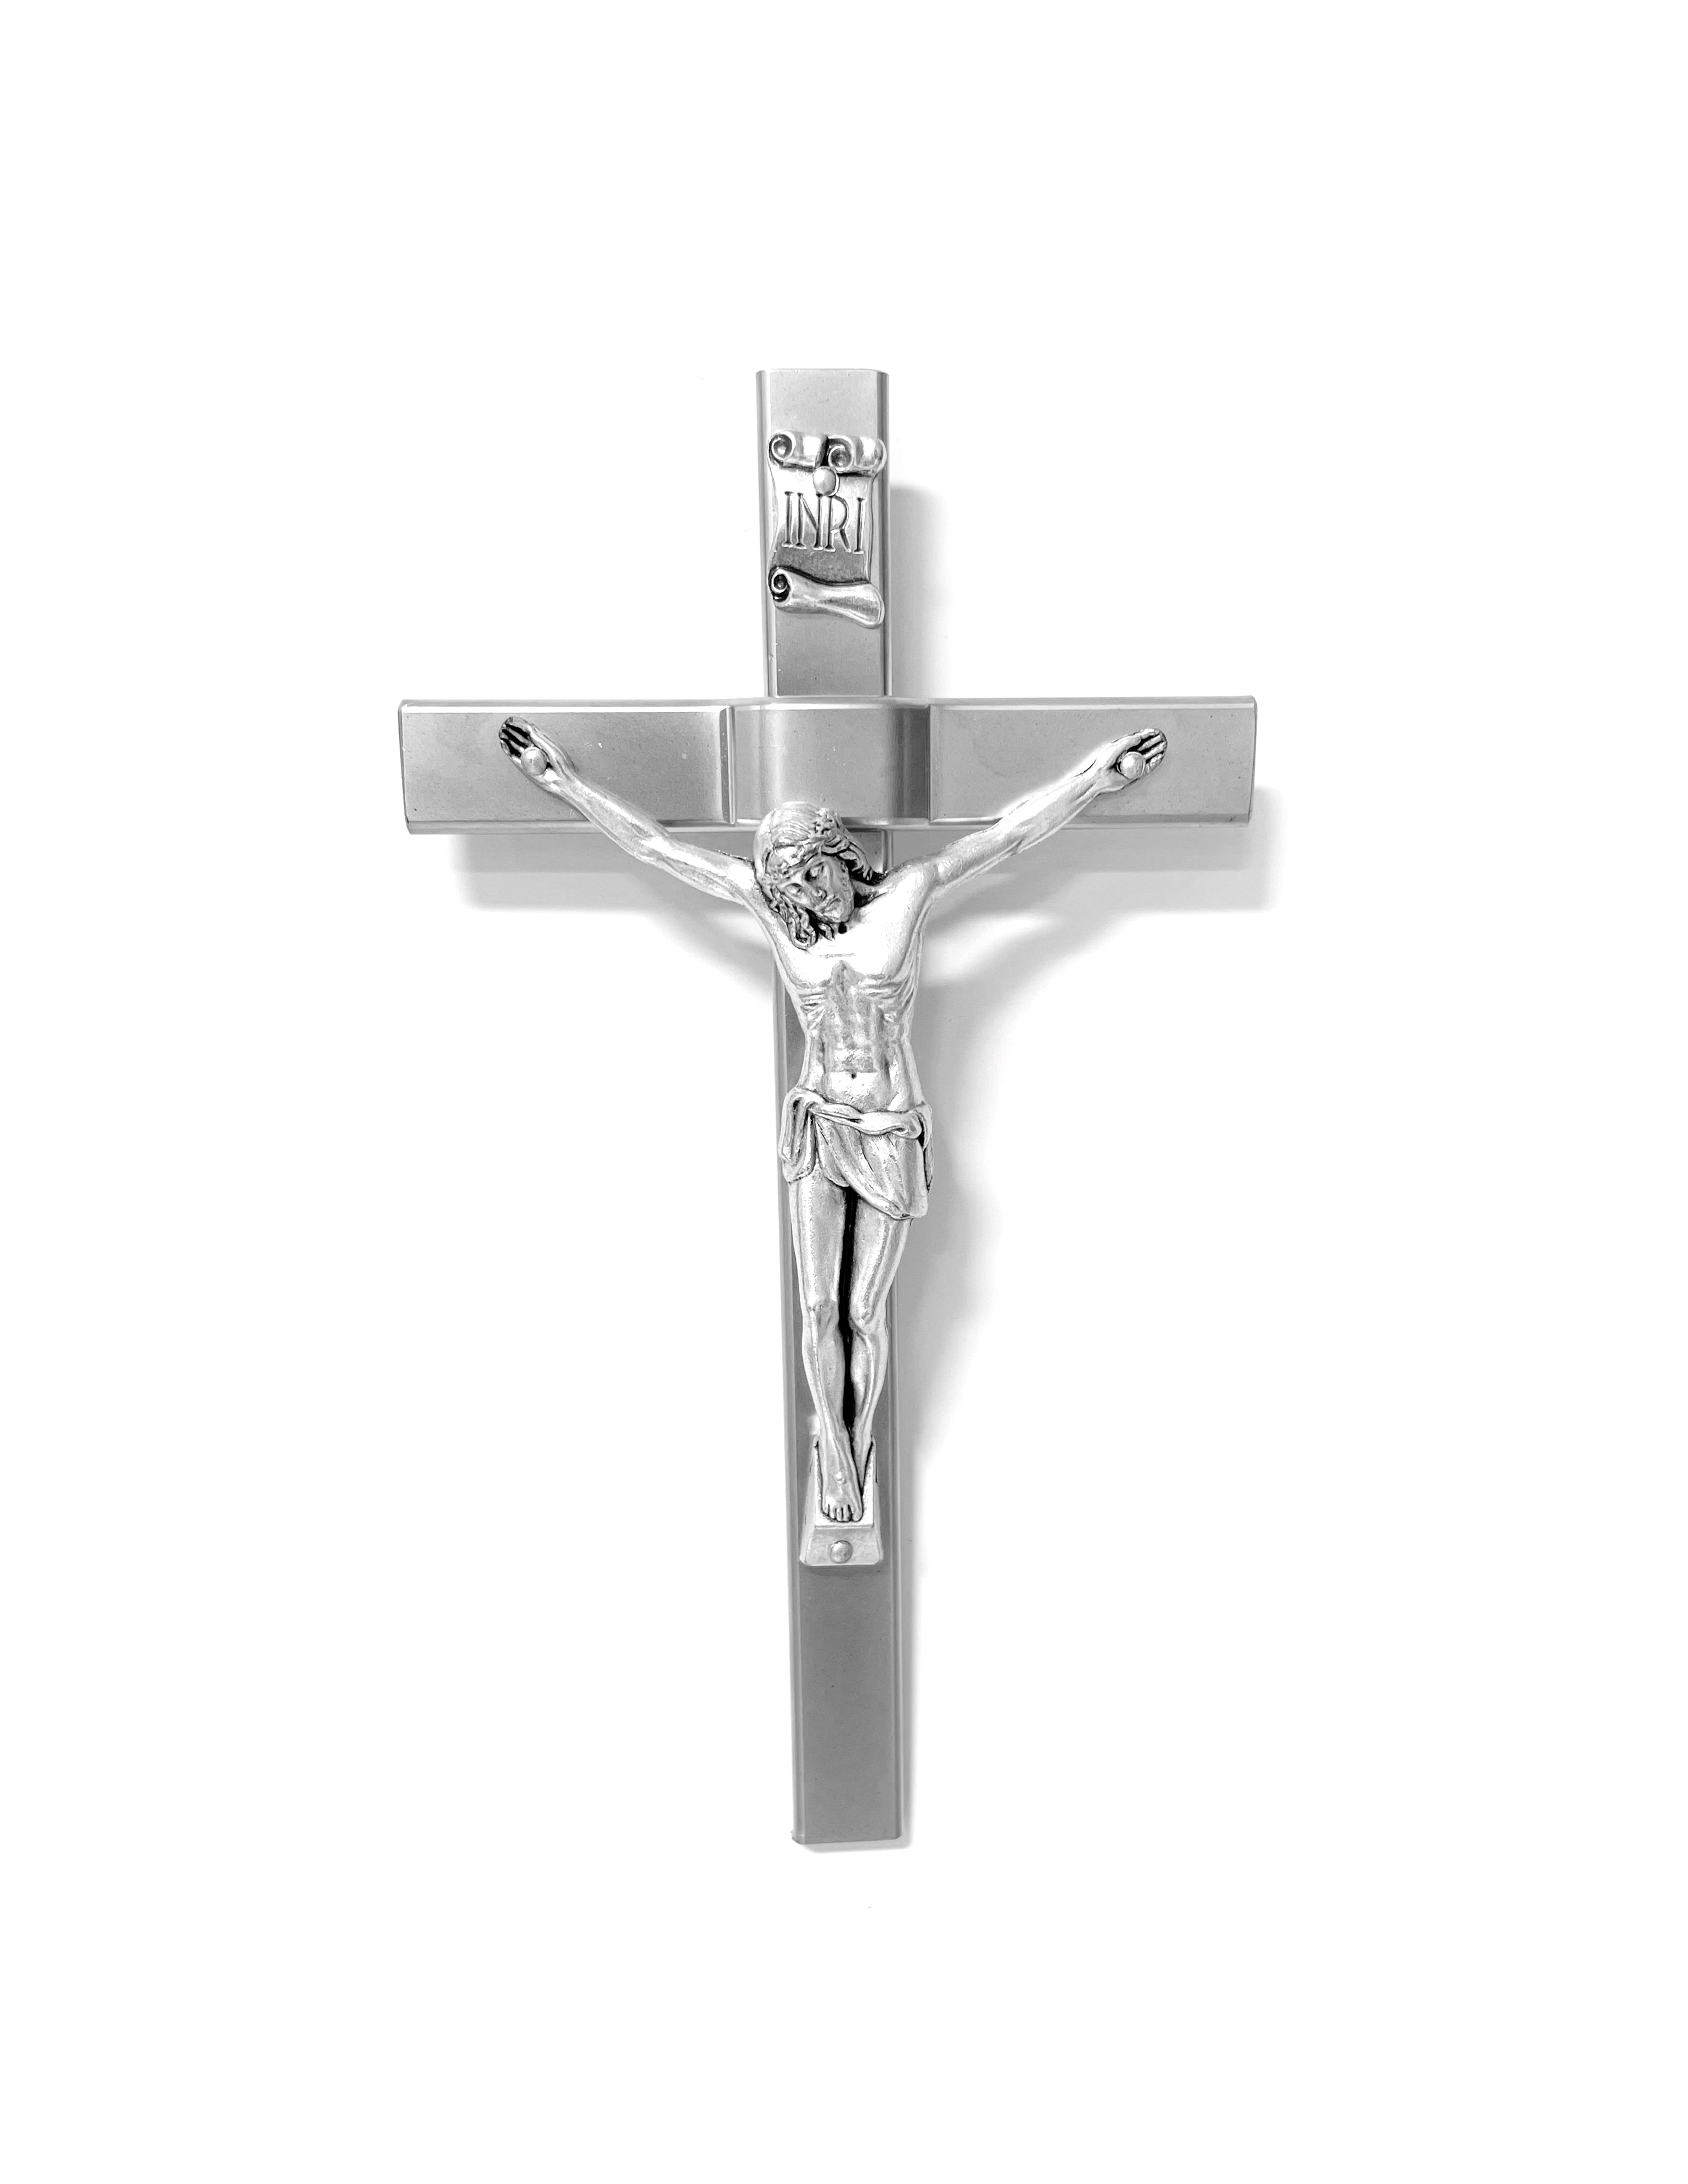 Gold and silver crucifixes made in Italy